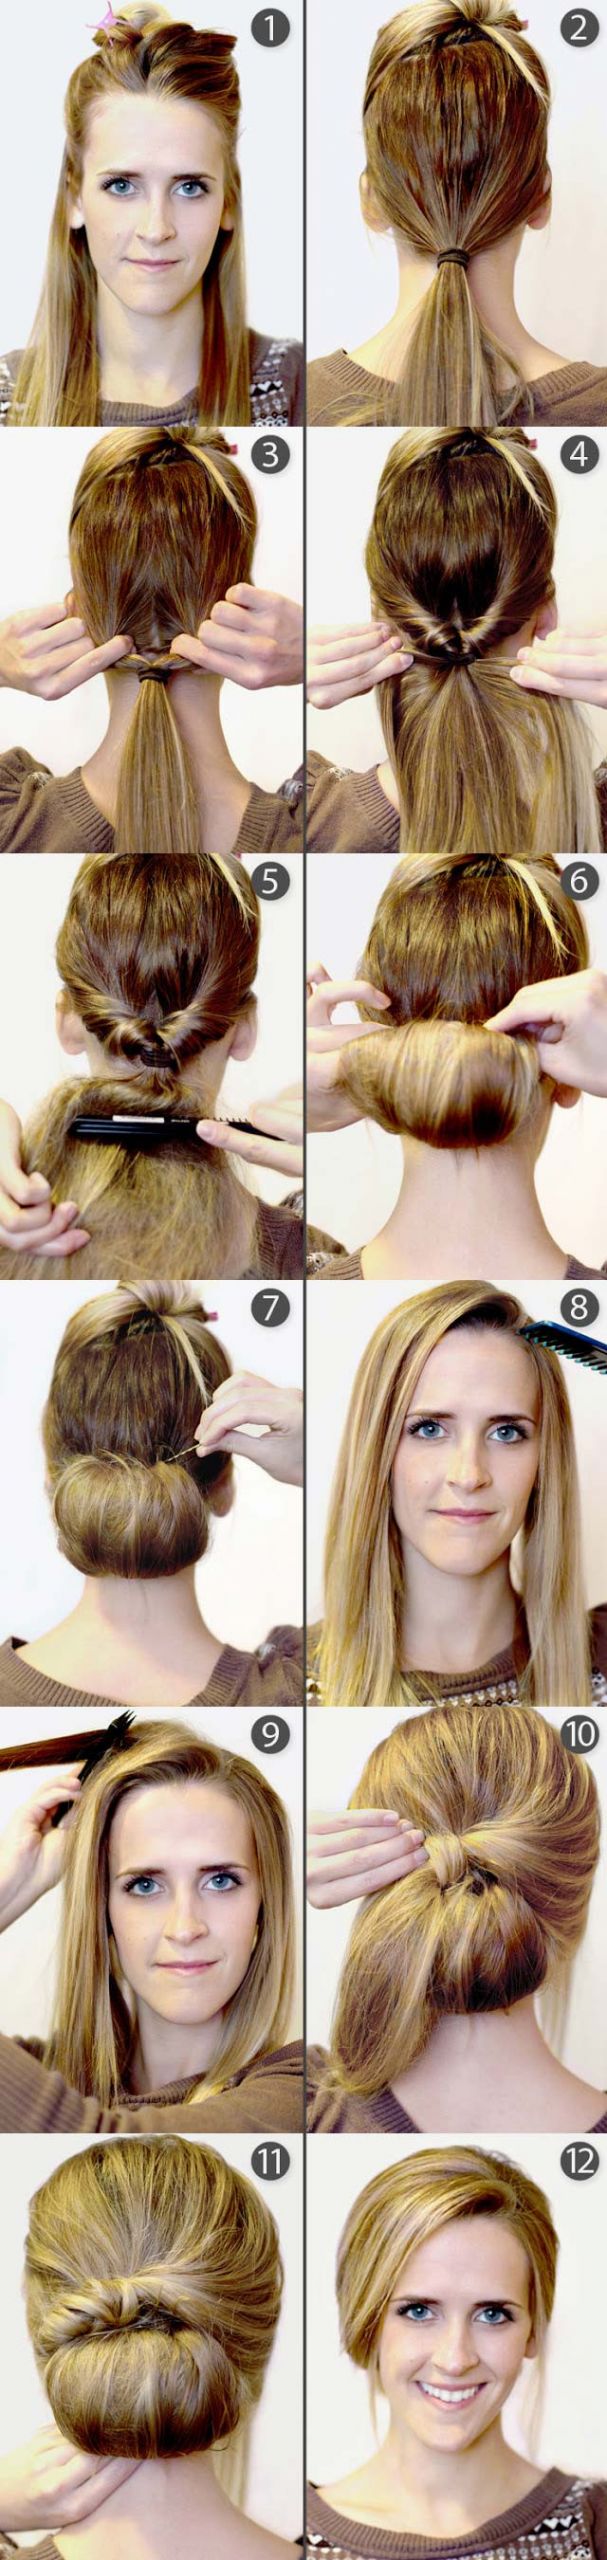 Diy Hairstyle For Long Hair
 9 Pretty DIY Hairstyles With Step by Step Tutorials